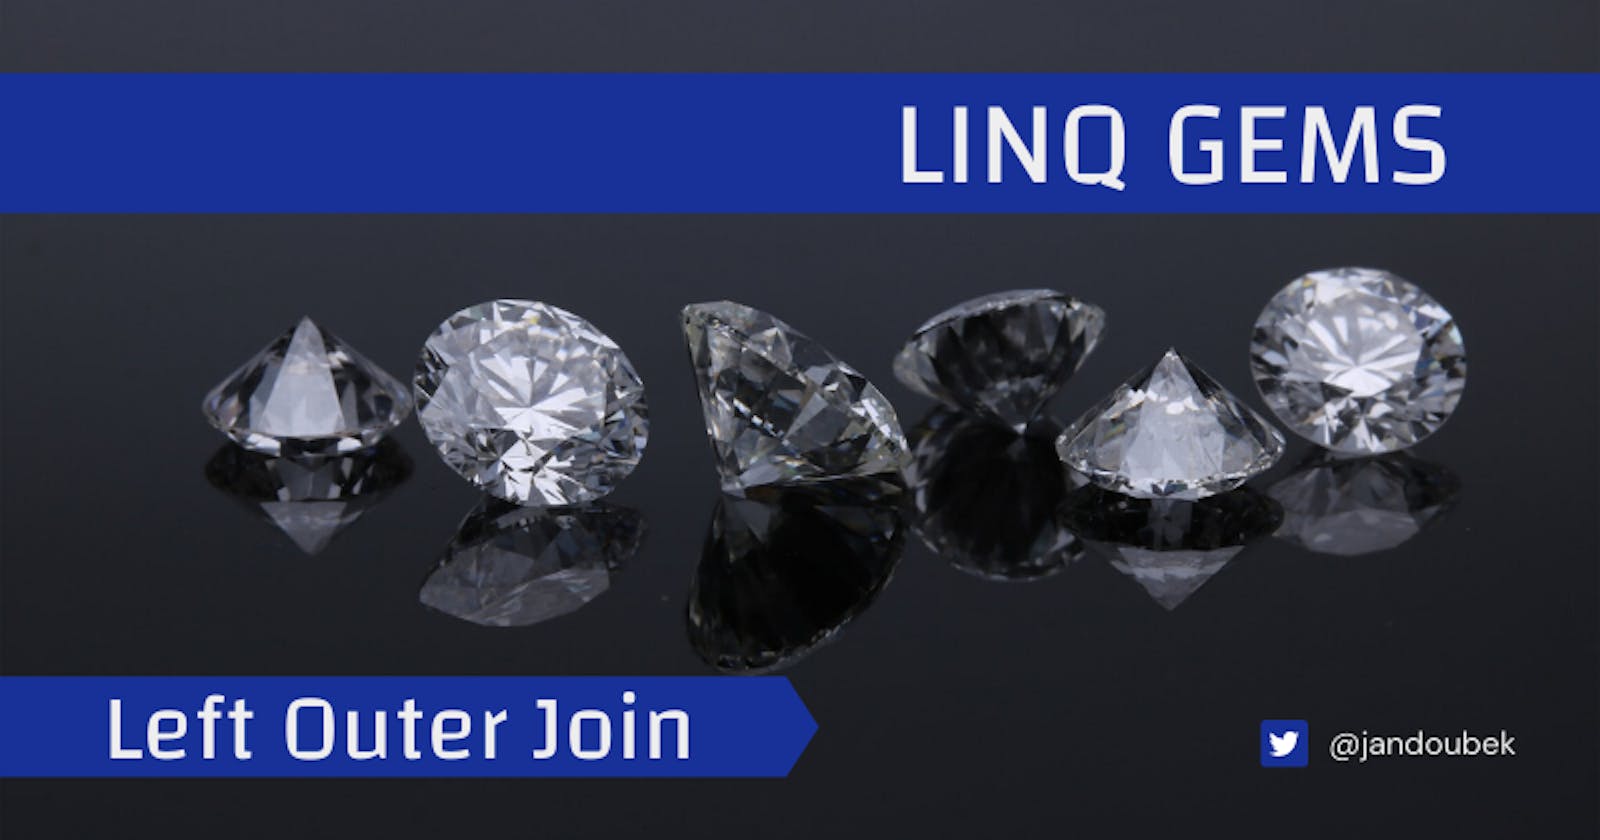 LINQ gems: Left Outer Join